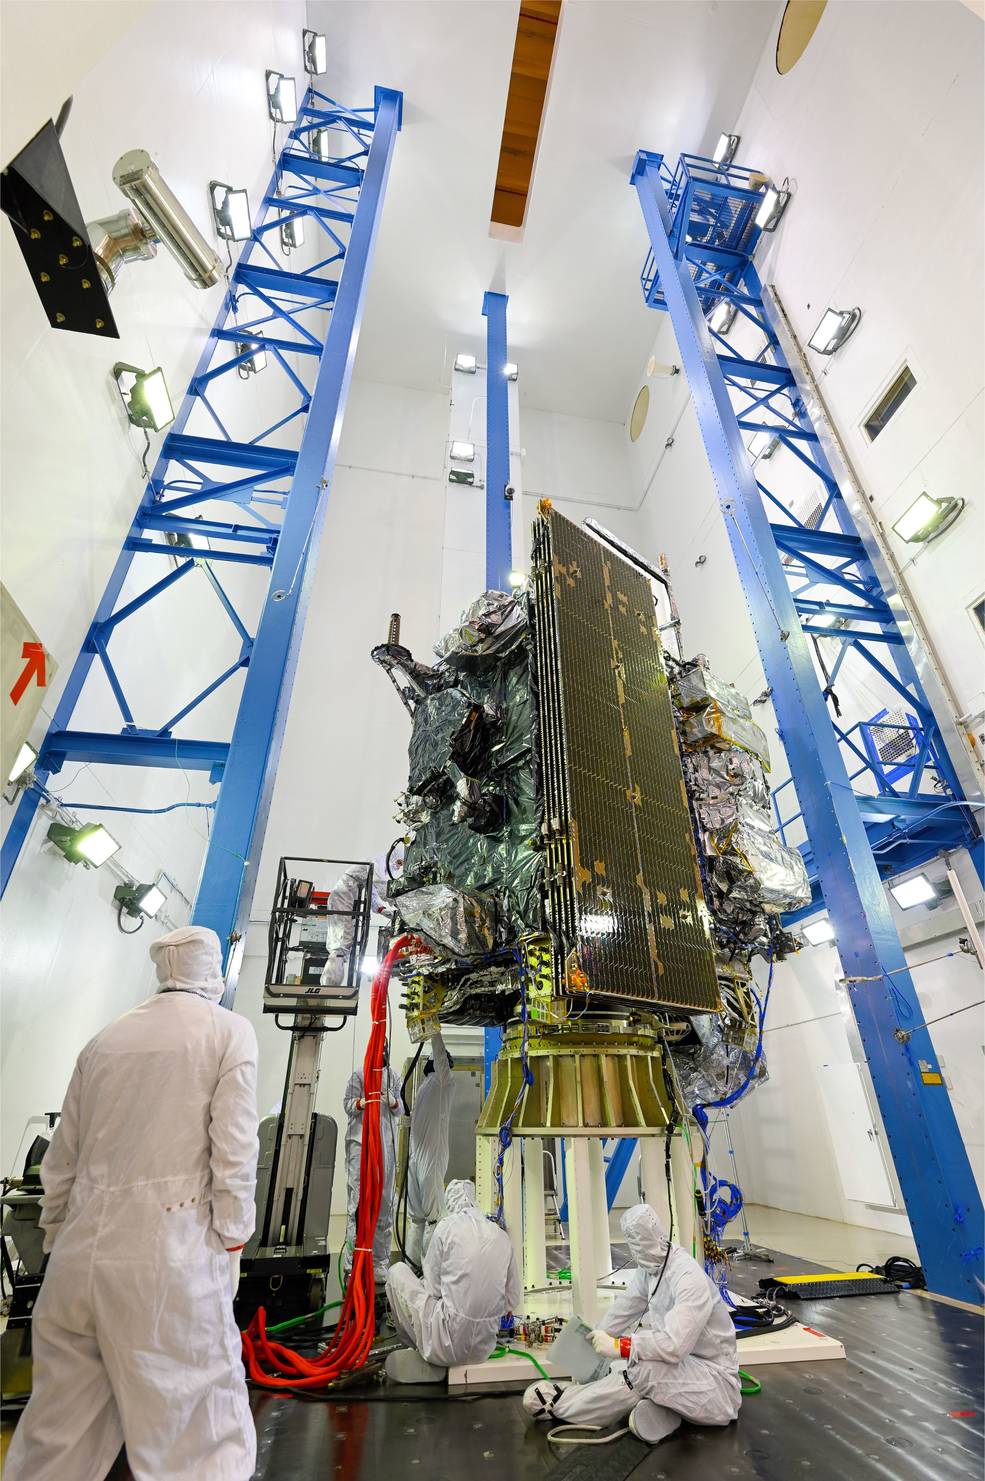 The GOES-U satellite stands vertical in a clean room on a stand made up of many electronic components and covered in static bags, its solar panels facing out. Many technicians in white clean suits work around the bottom of the satellite.